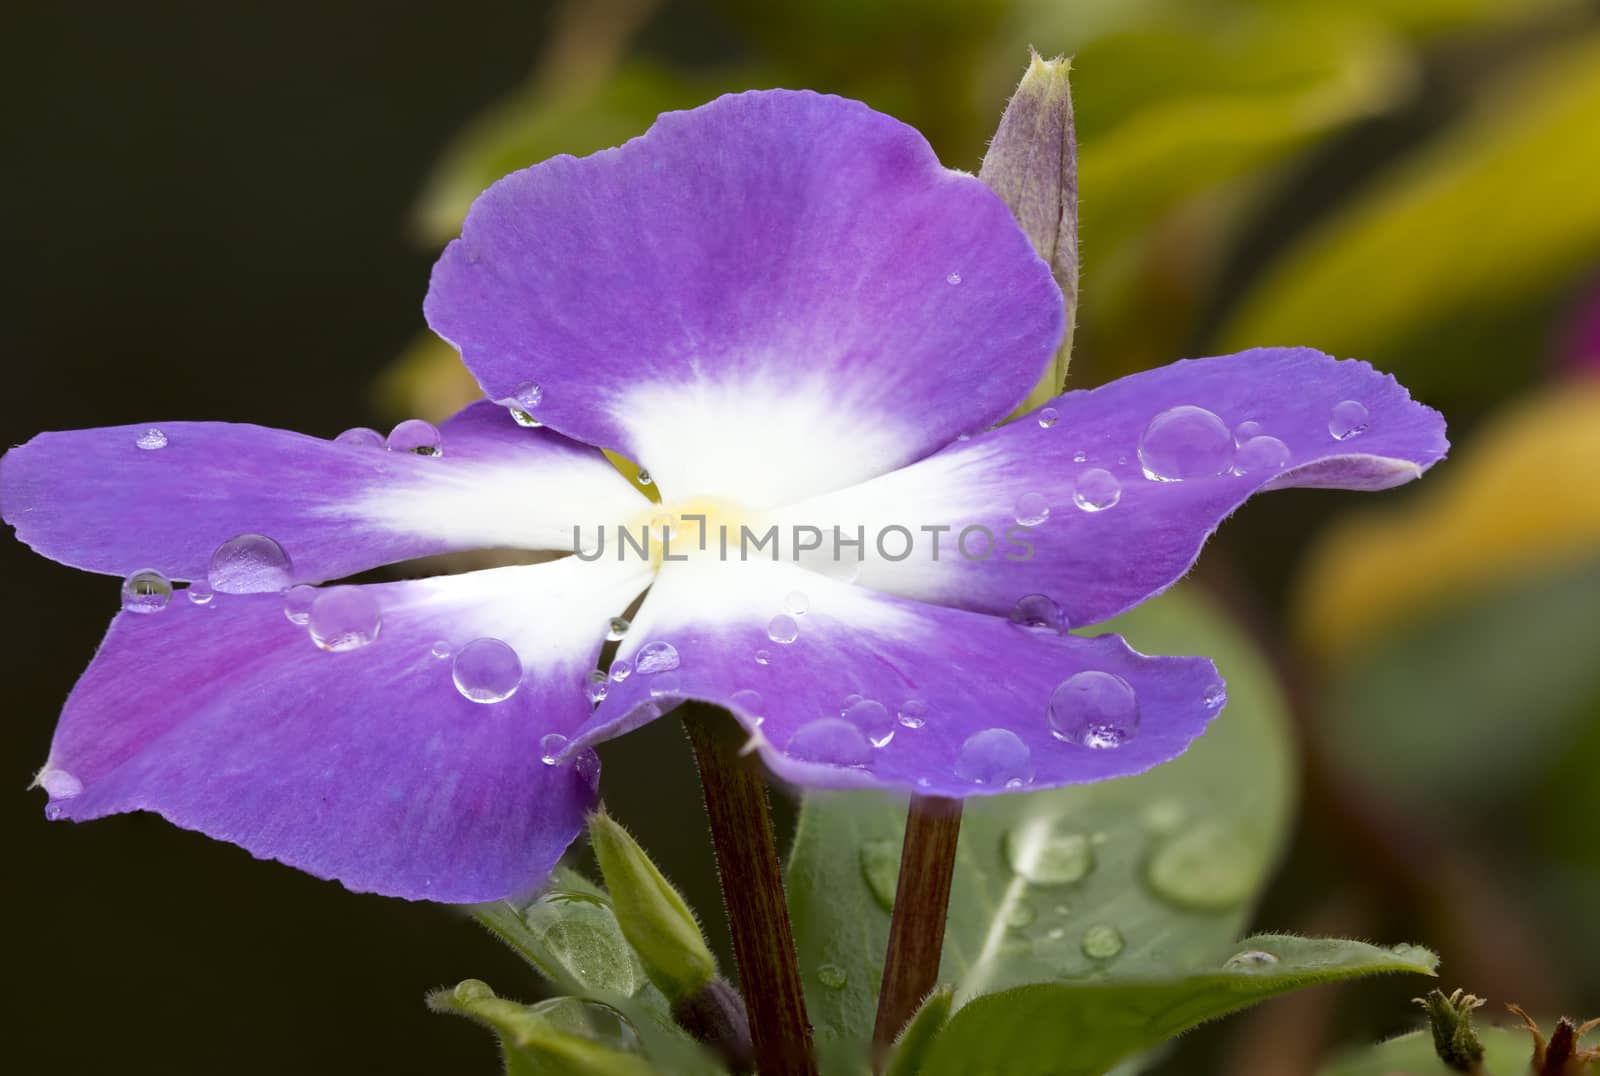 Cape Periwinkle was taken in the garden after the rain.